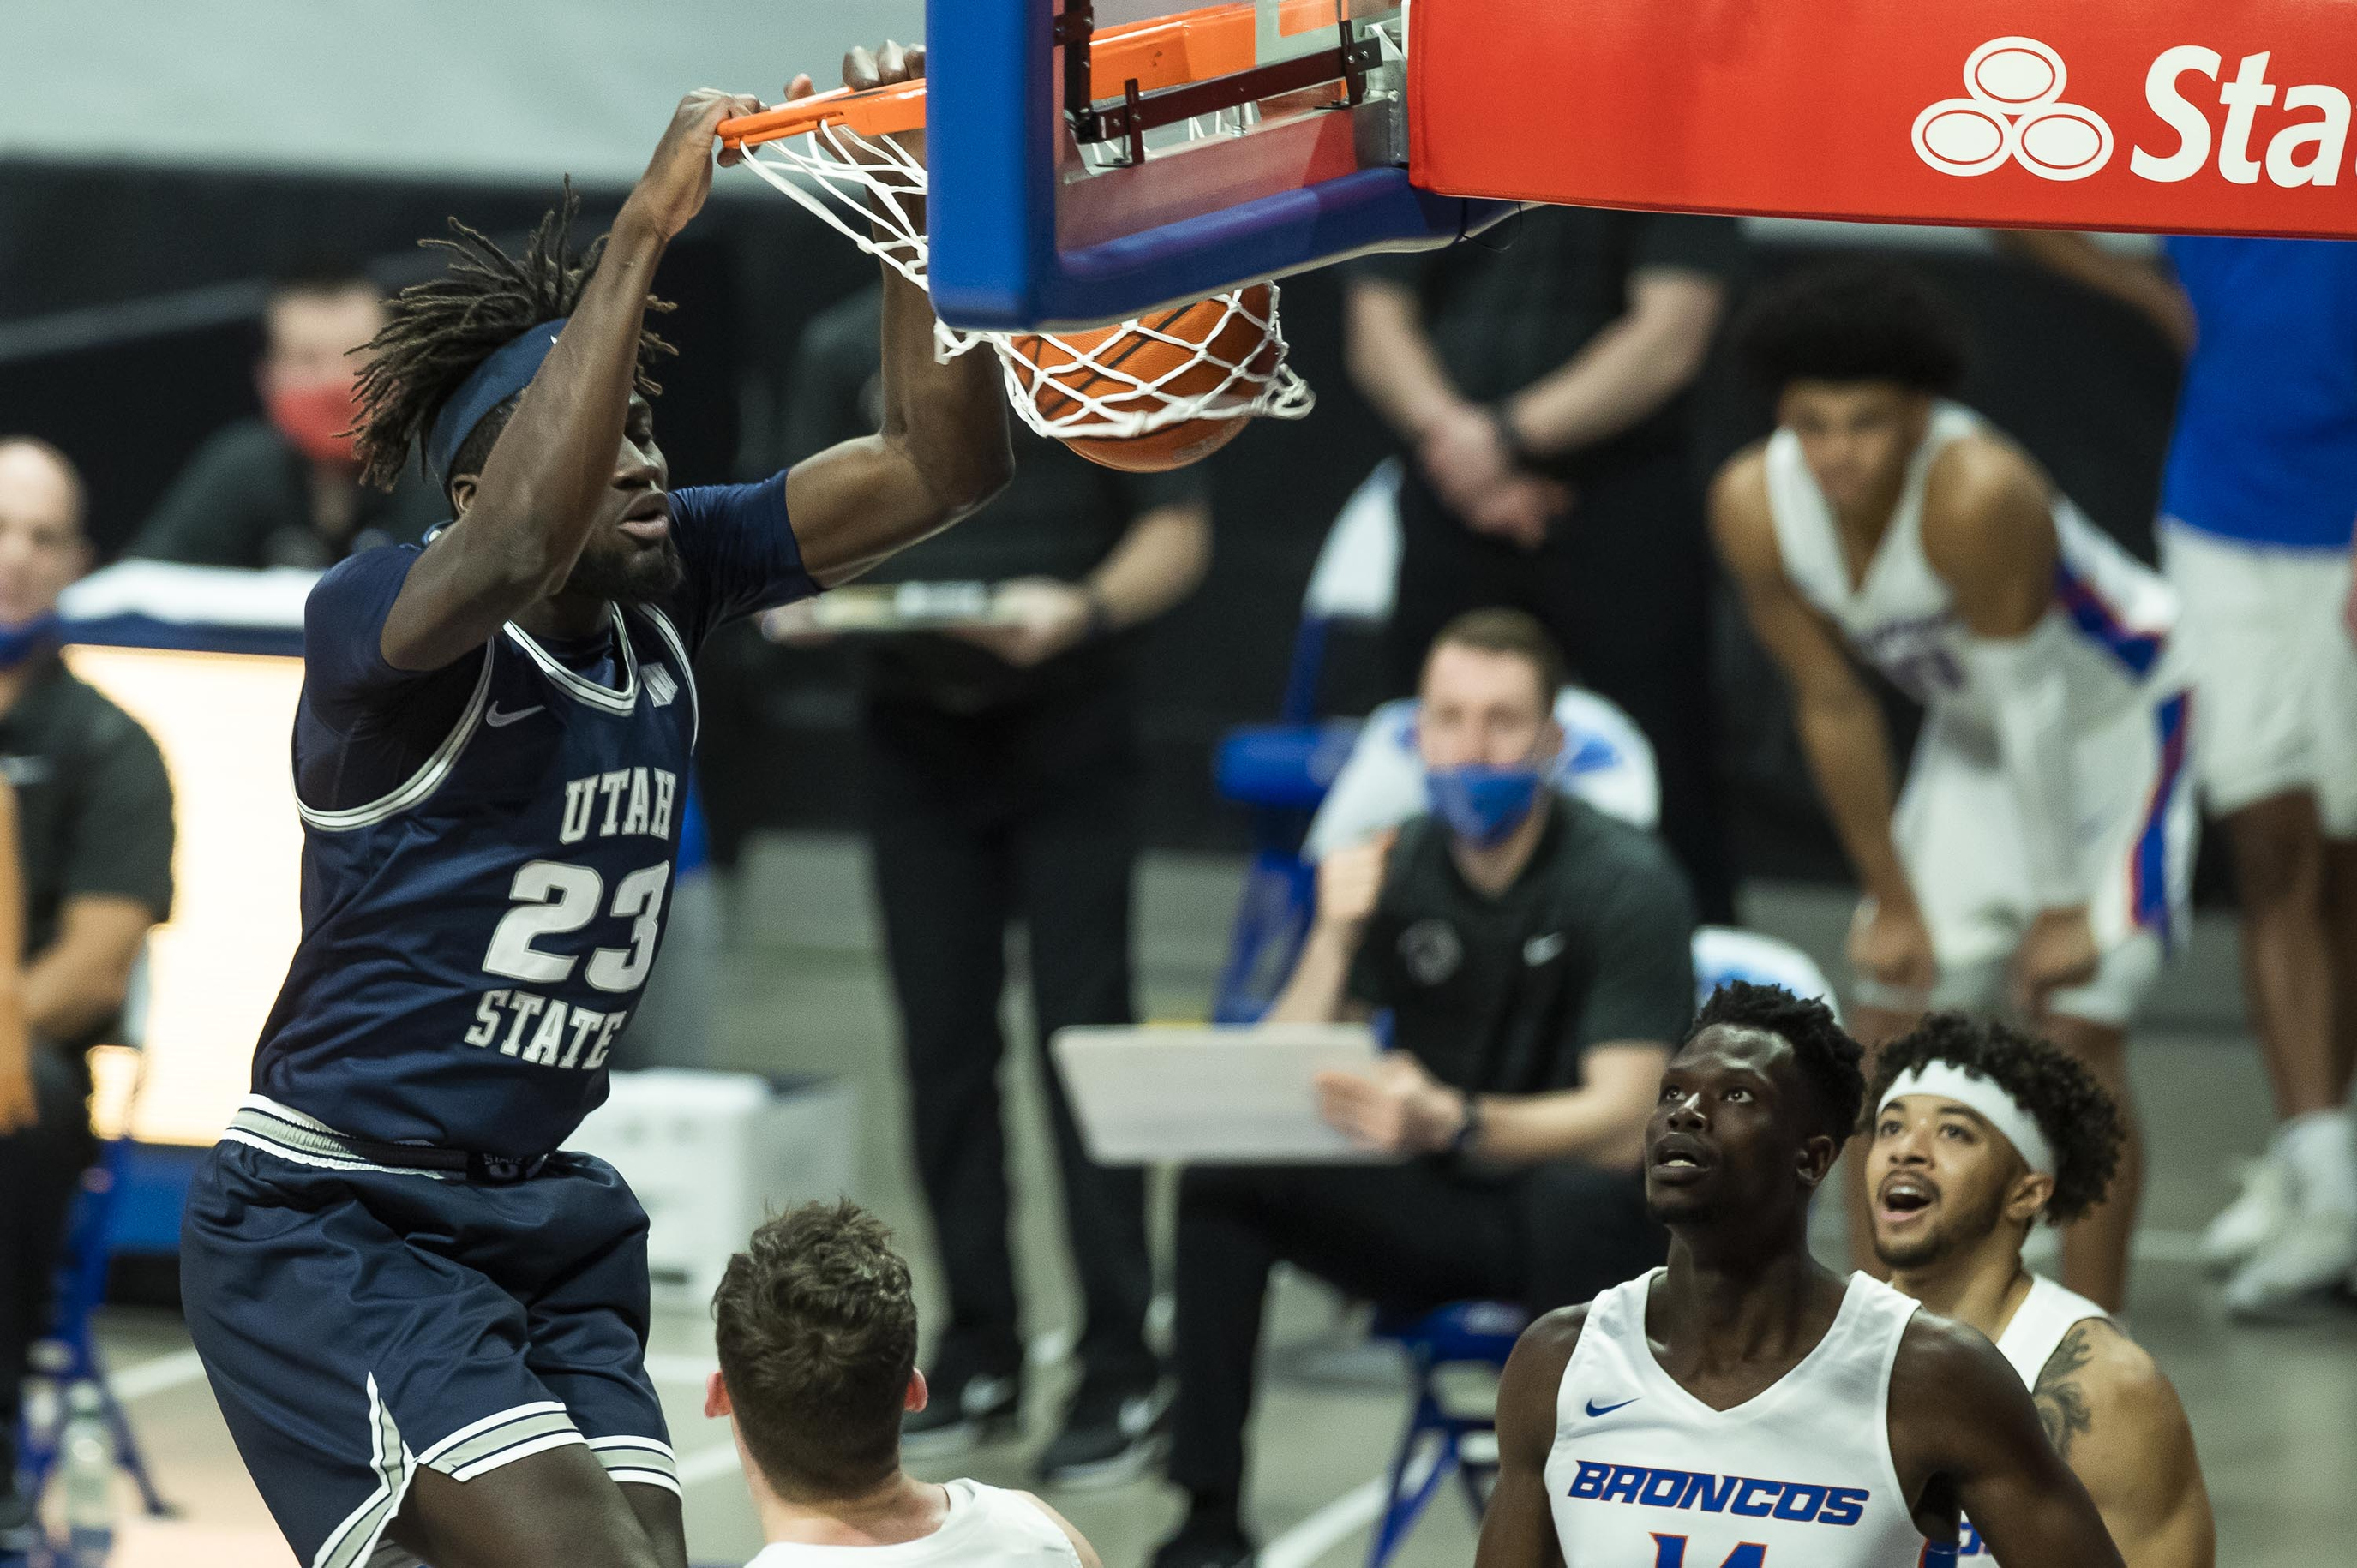 How USU Star Neemias Queta Went From Raw Prospect To NBA Player